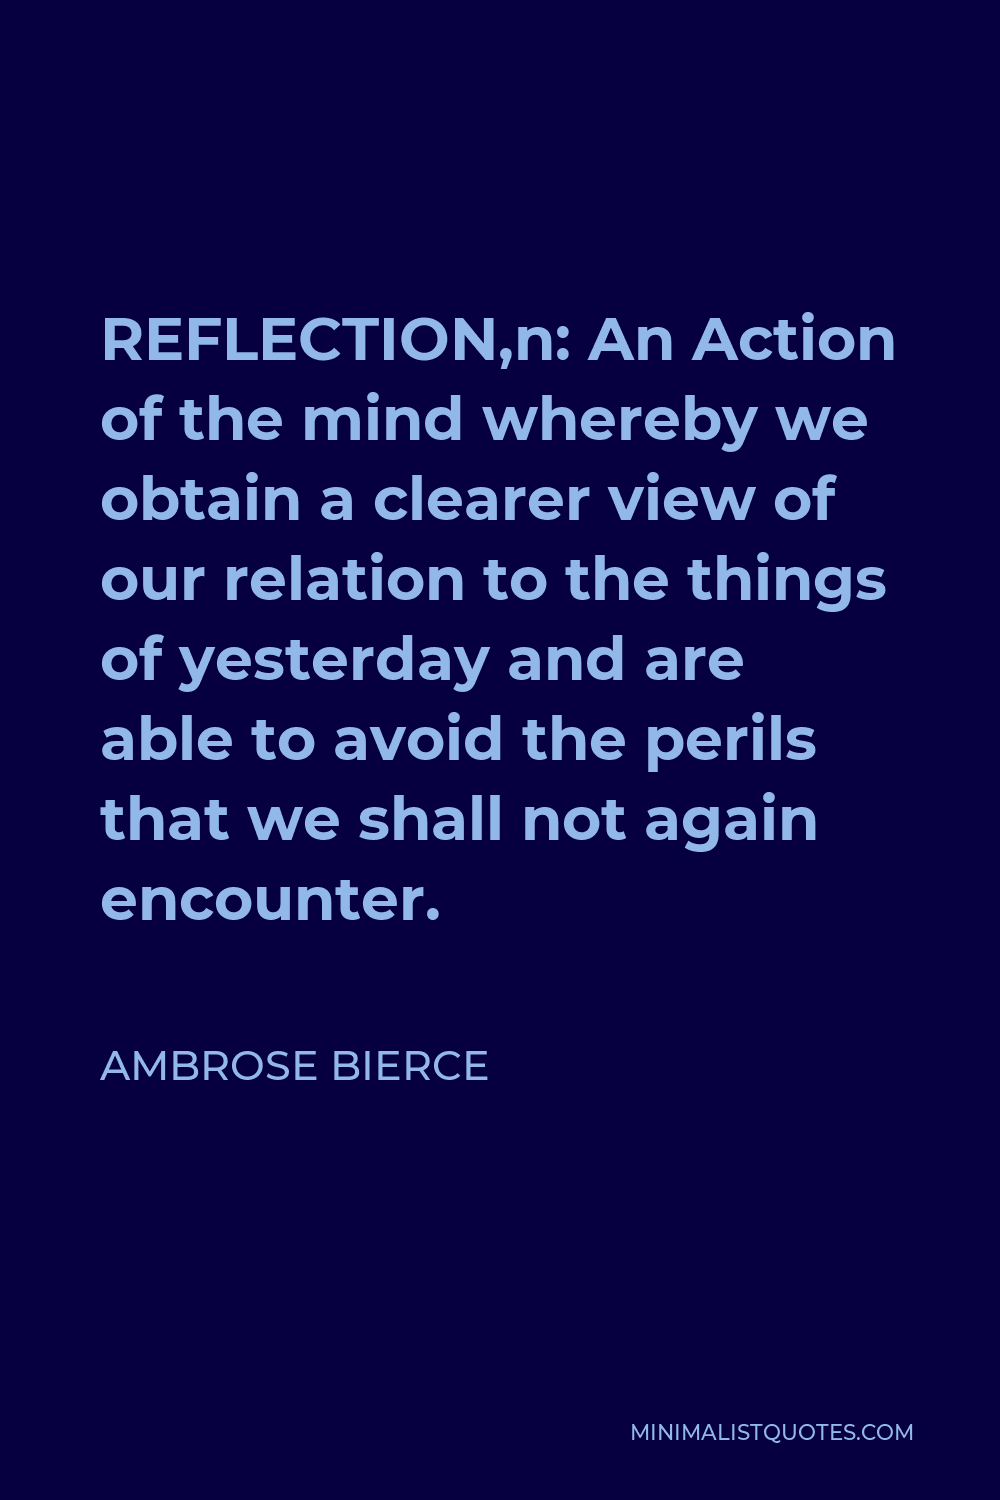 Ambrose Bierce Quote - REFLECTION,n: An Action of the mind whereby we obtain a clearer view of our relation to the things of yesterday and are able to avoid the perils that we shall not again encounter.